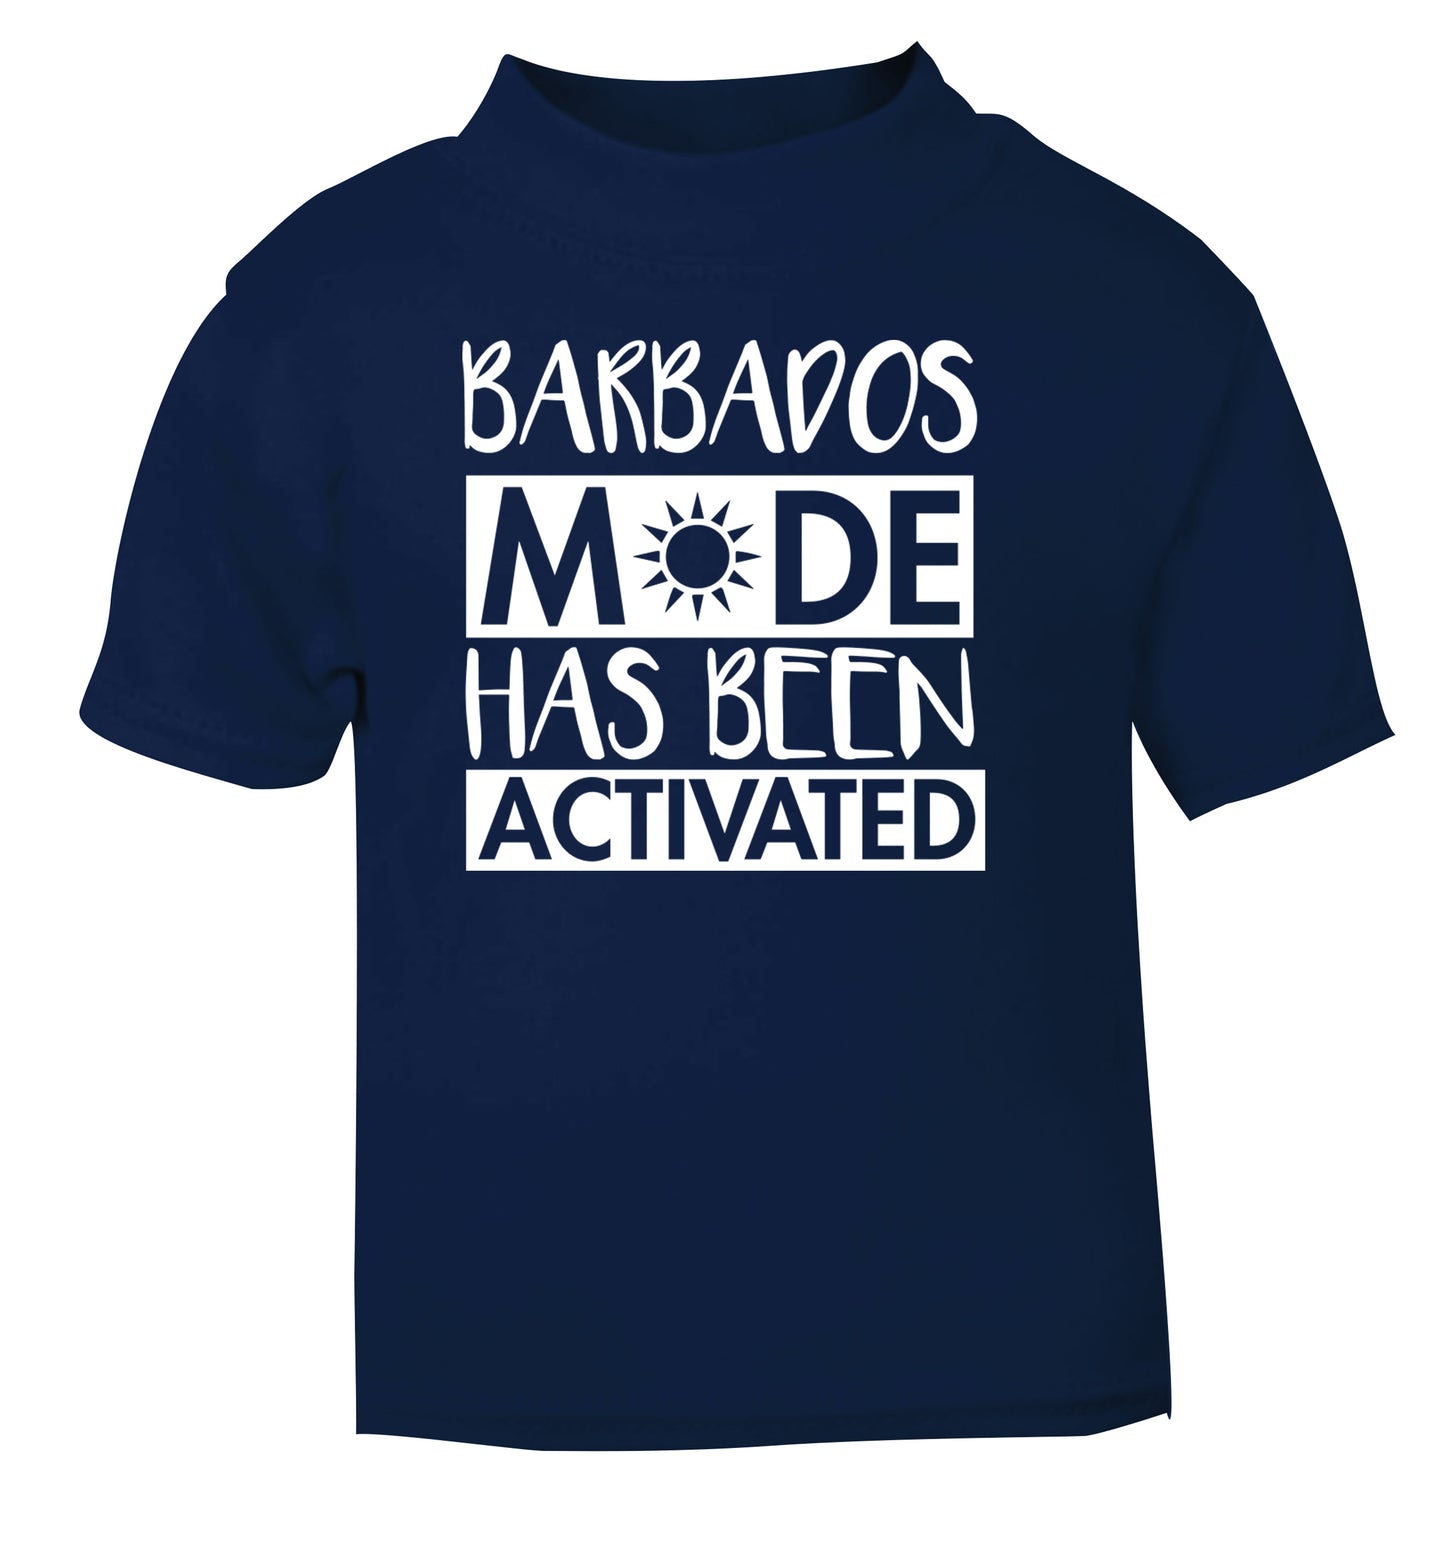 Barbados mode has been activated navy Baby Toddler Tshirt 2 Years